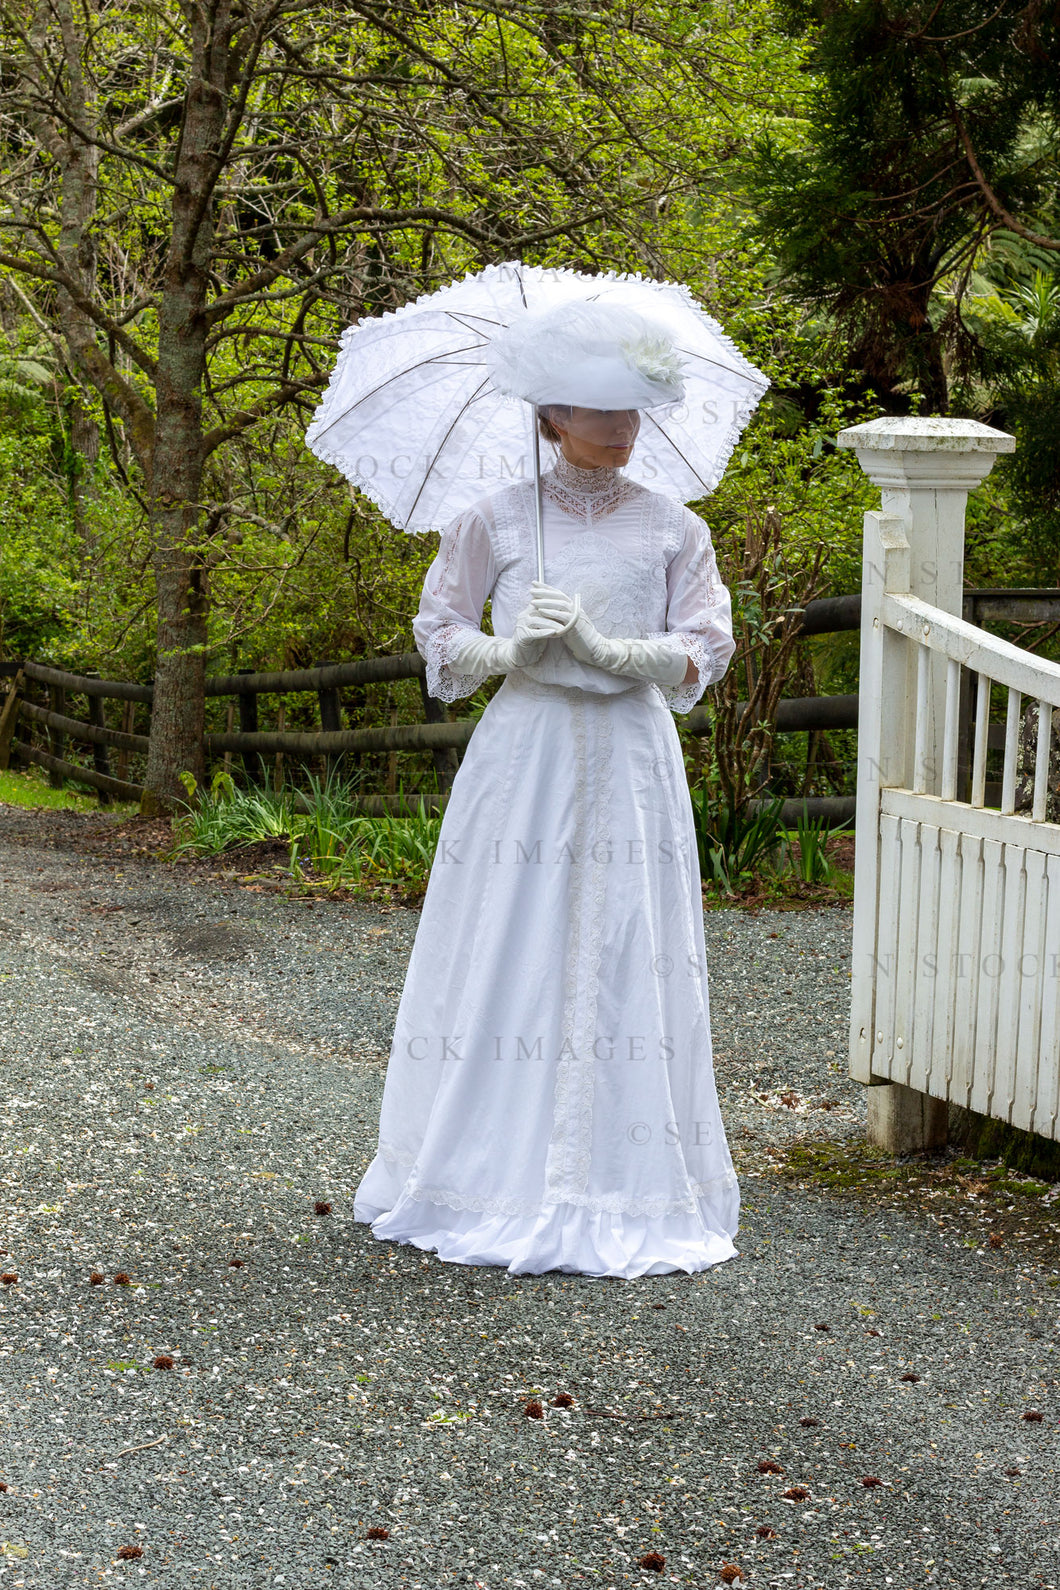 Edwardian woman in a white lace blouse and skirt holding a parasol and walking in a garden (Tayla 0187)